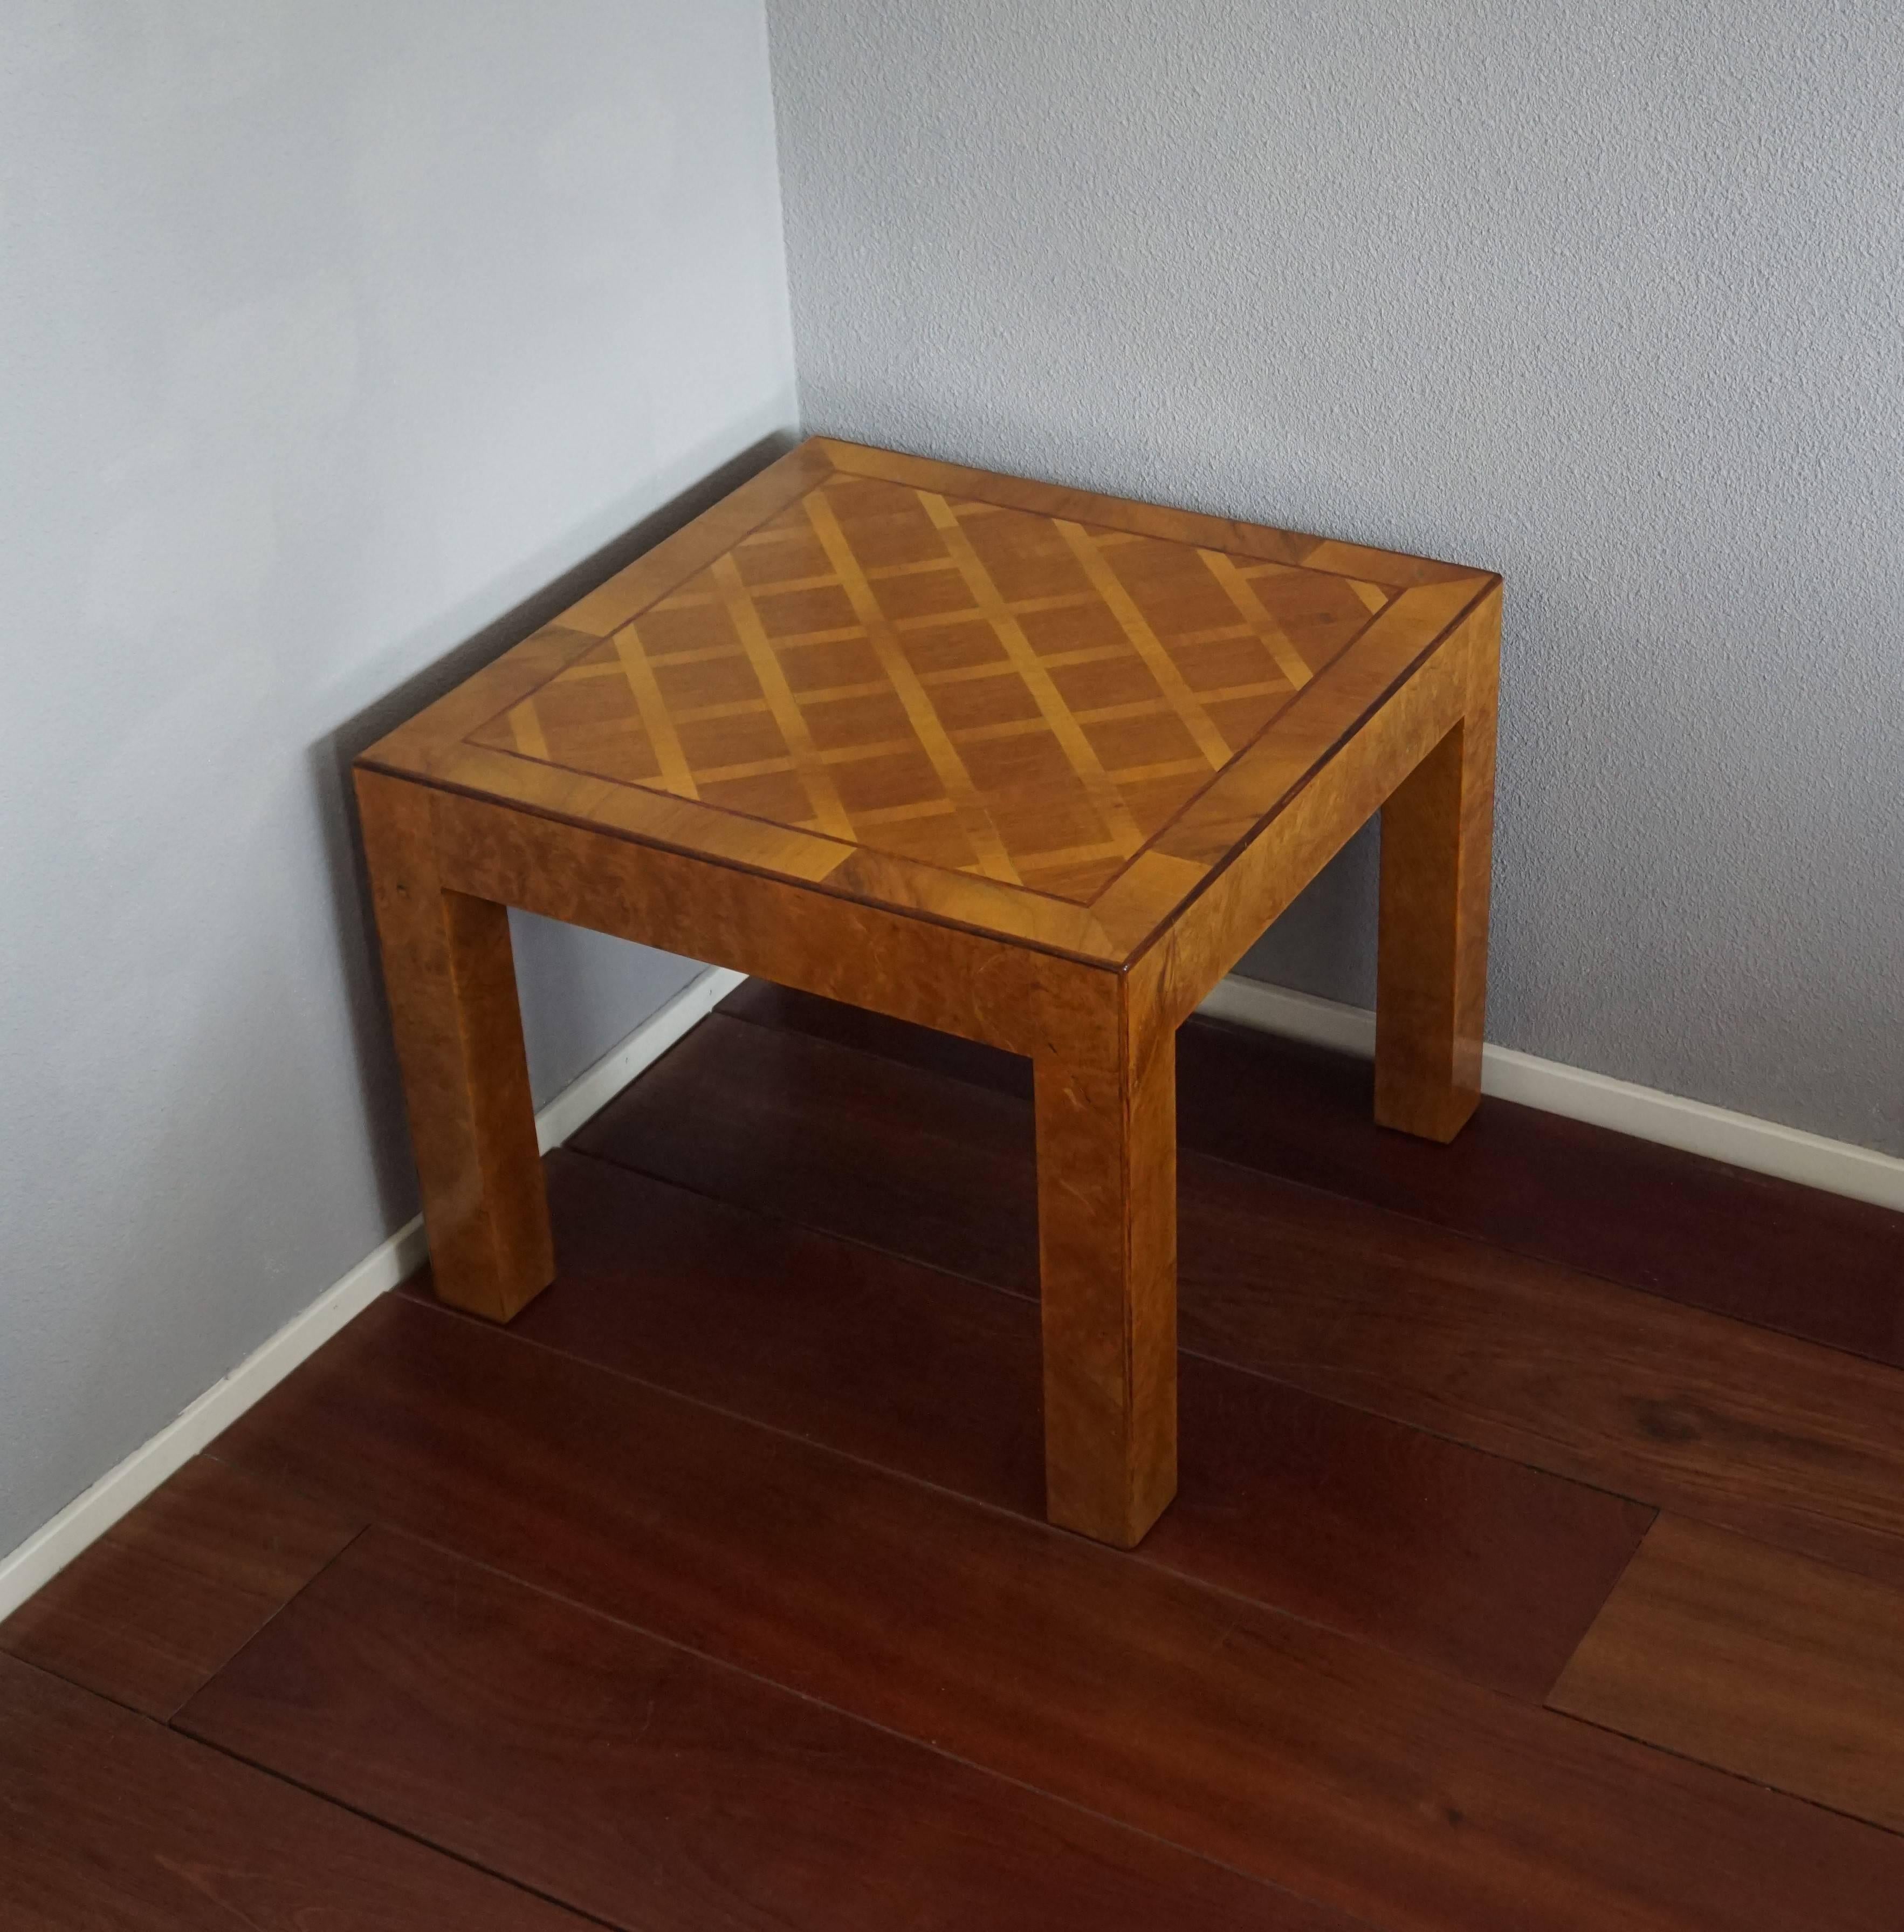 Top quality and excellent condition end table.

This terrific mid-late 20th century table is interesting for many reasons. The condition is second to none, the design is striking and a joy to watch, the size is practical for many purposes and the